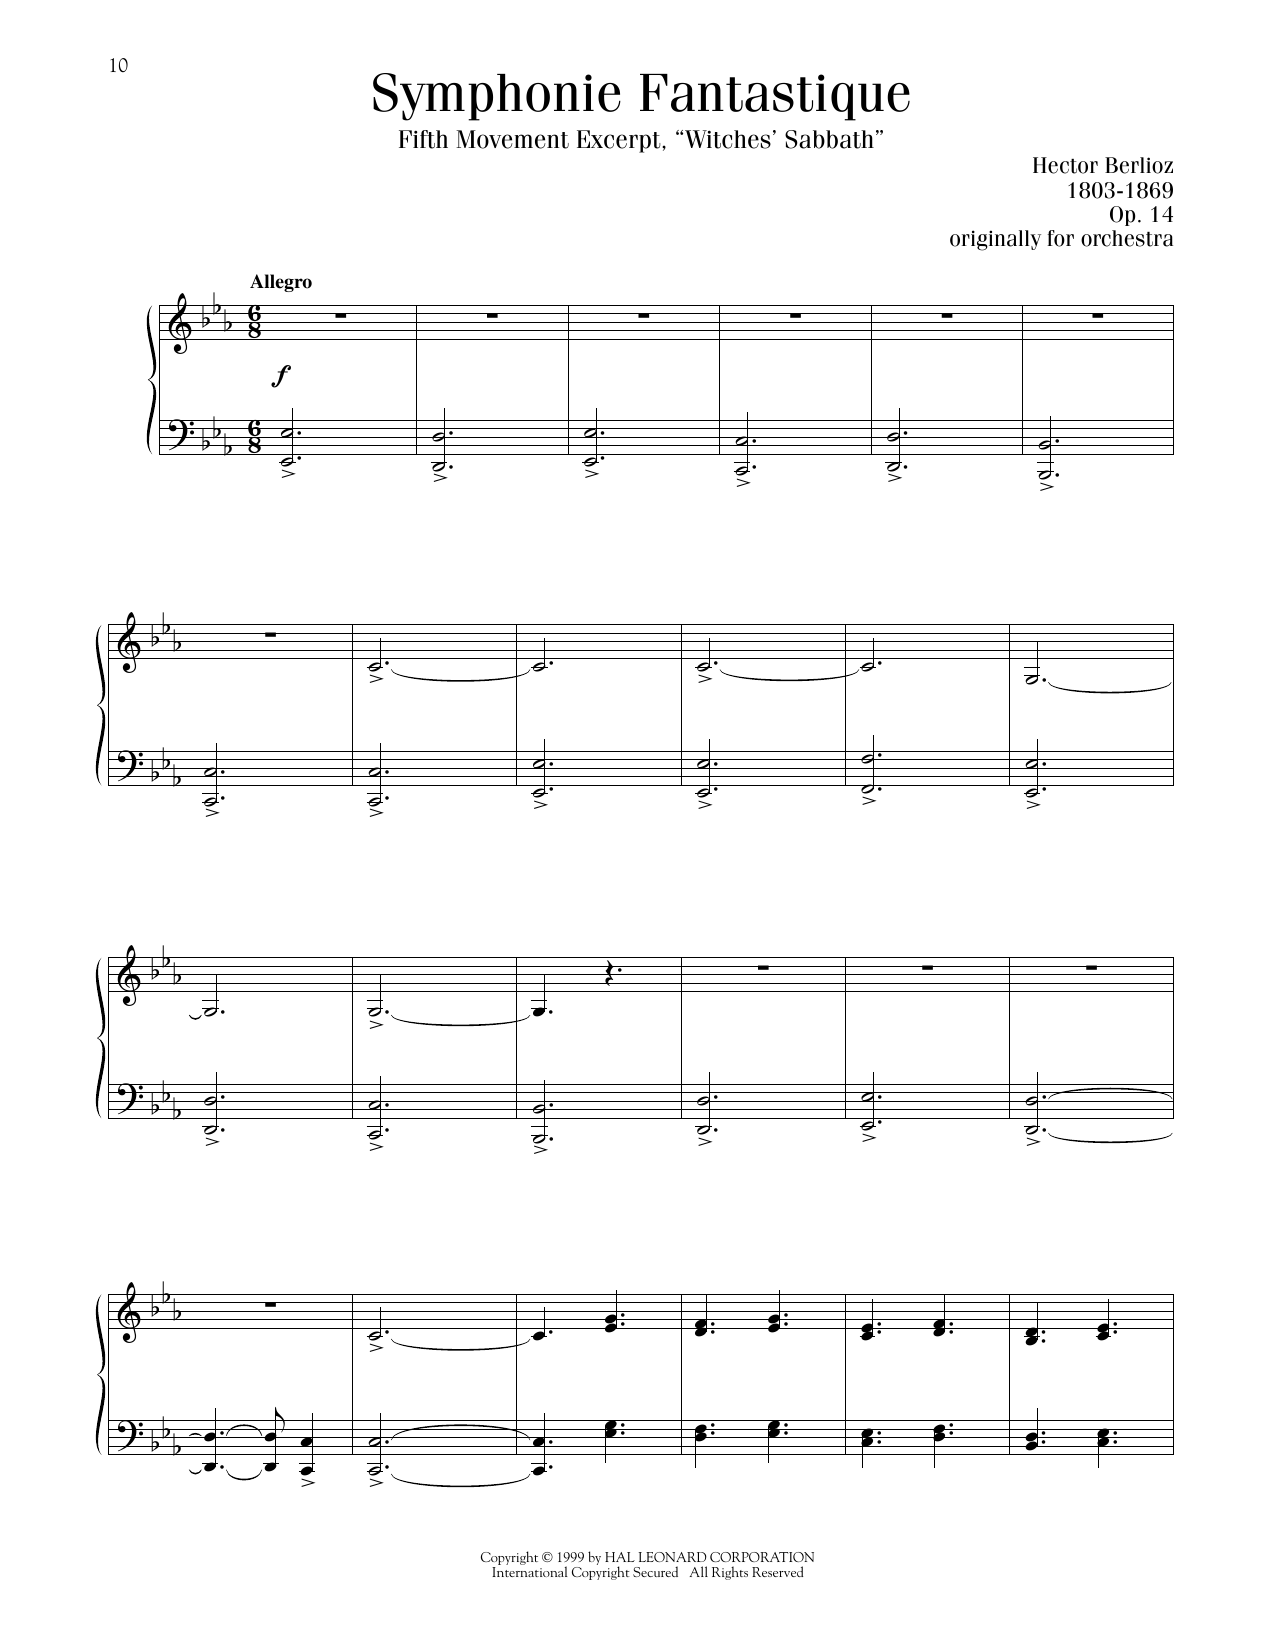 Hector Berlioz Witches' Sabbath sheet music notes printable PDF score